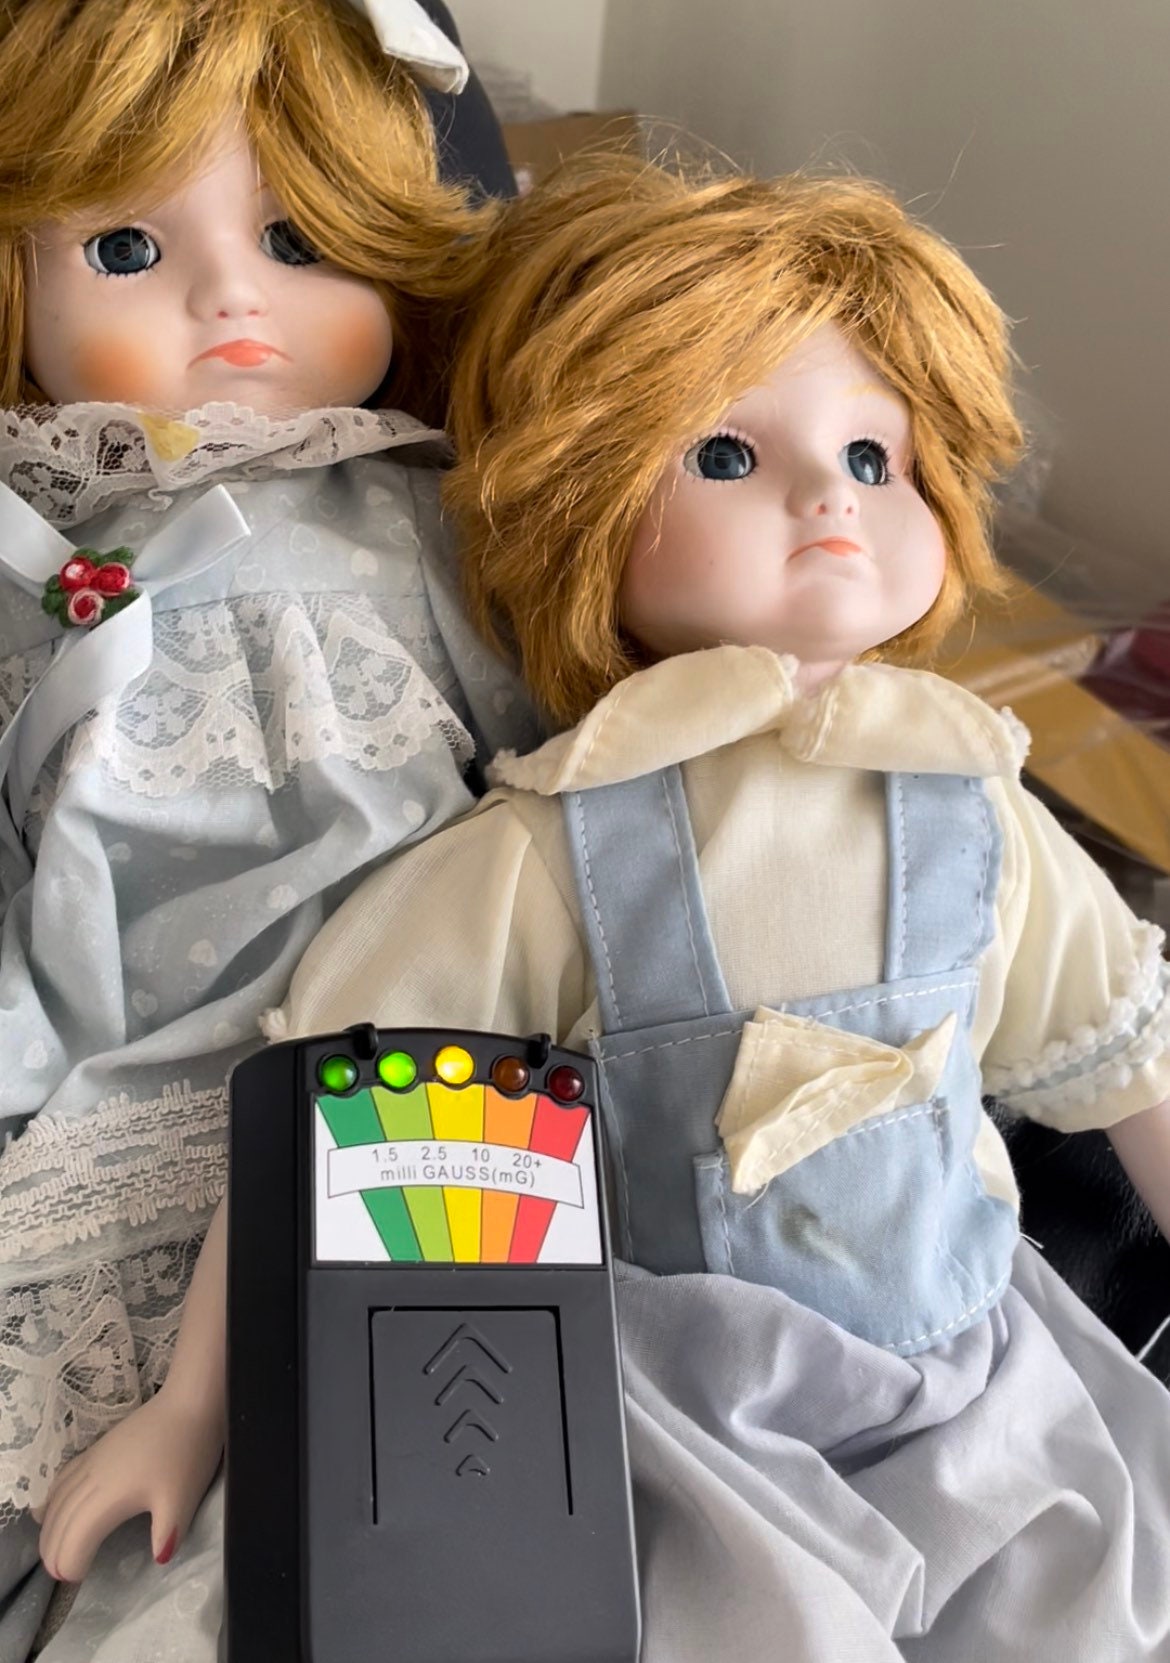 Haunted Doll Active - Etsy